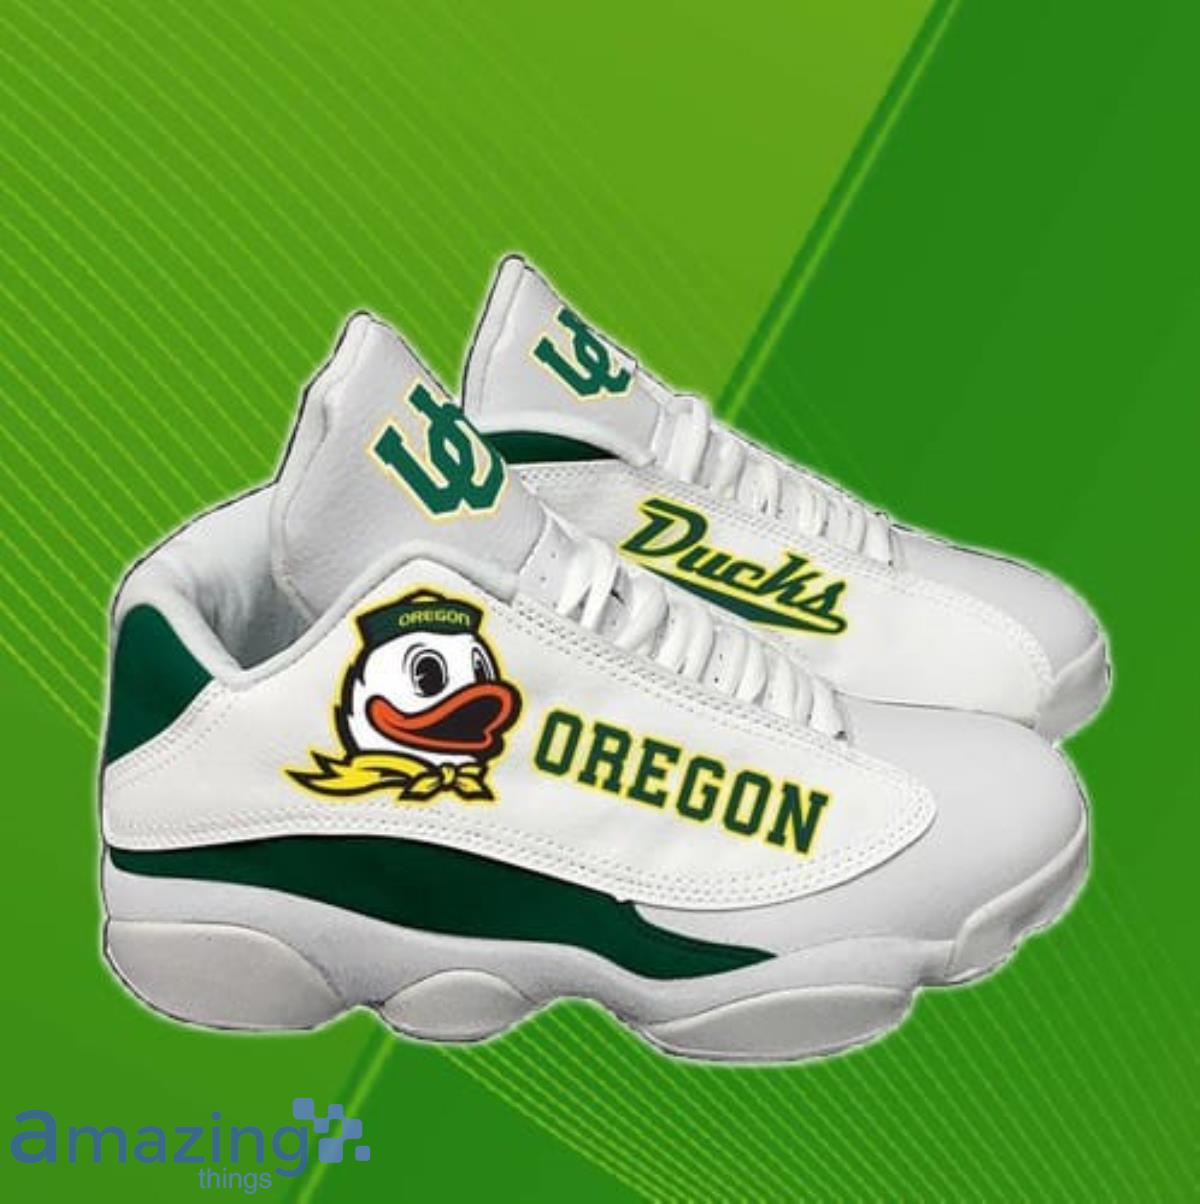 Oregon Ducks Personalized Tennis Shoes Air Jordan 13 Sneakers Gift For Fan Product Photo 1